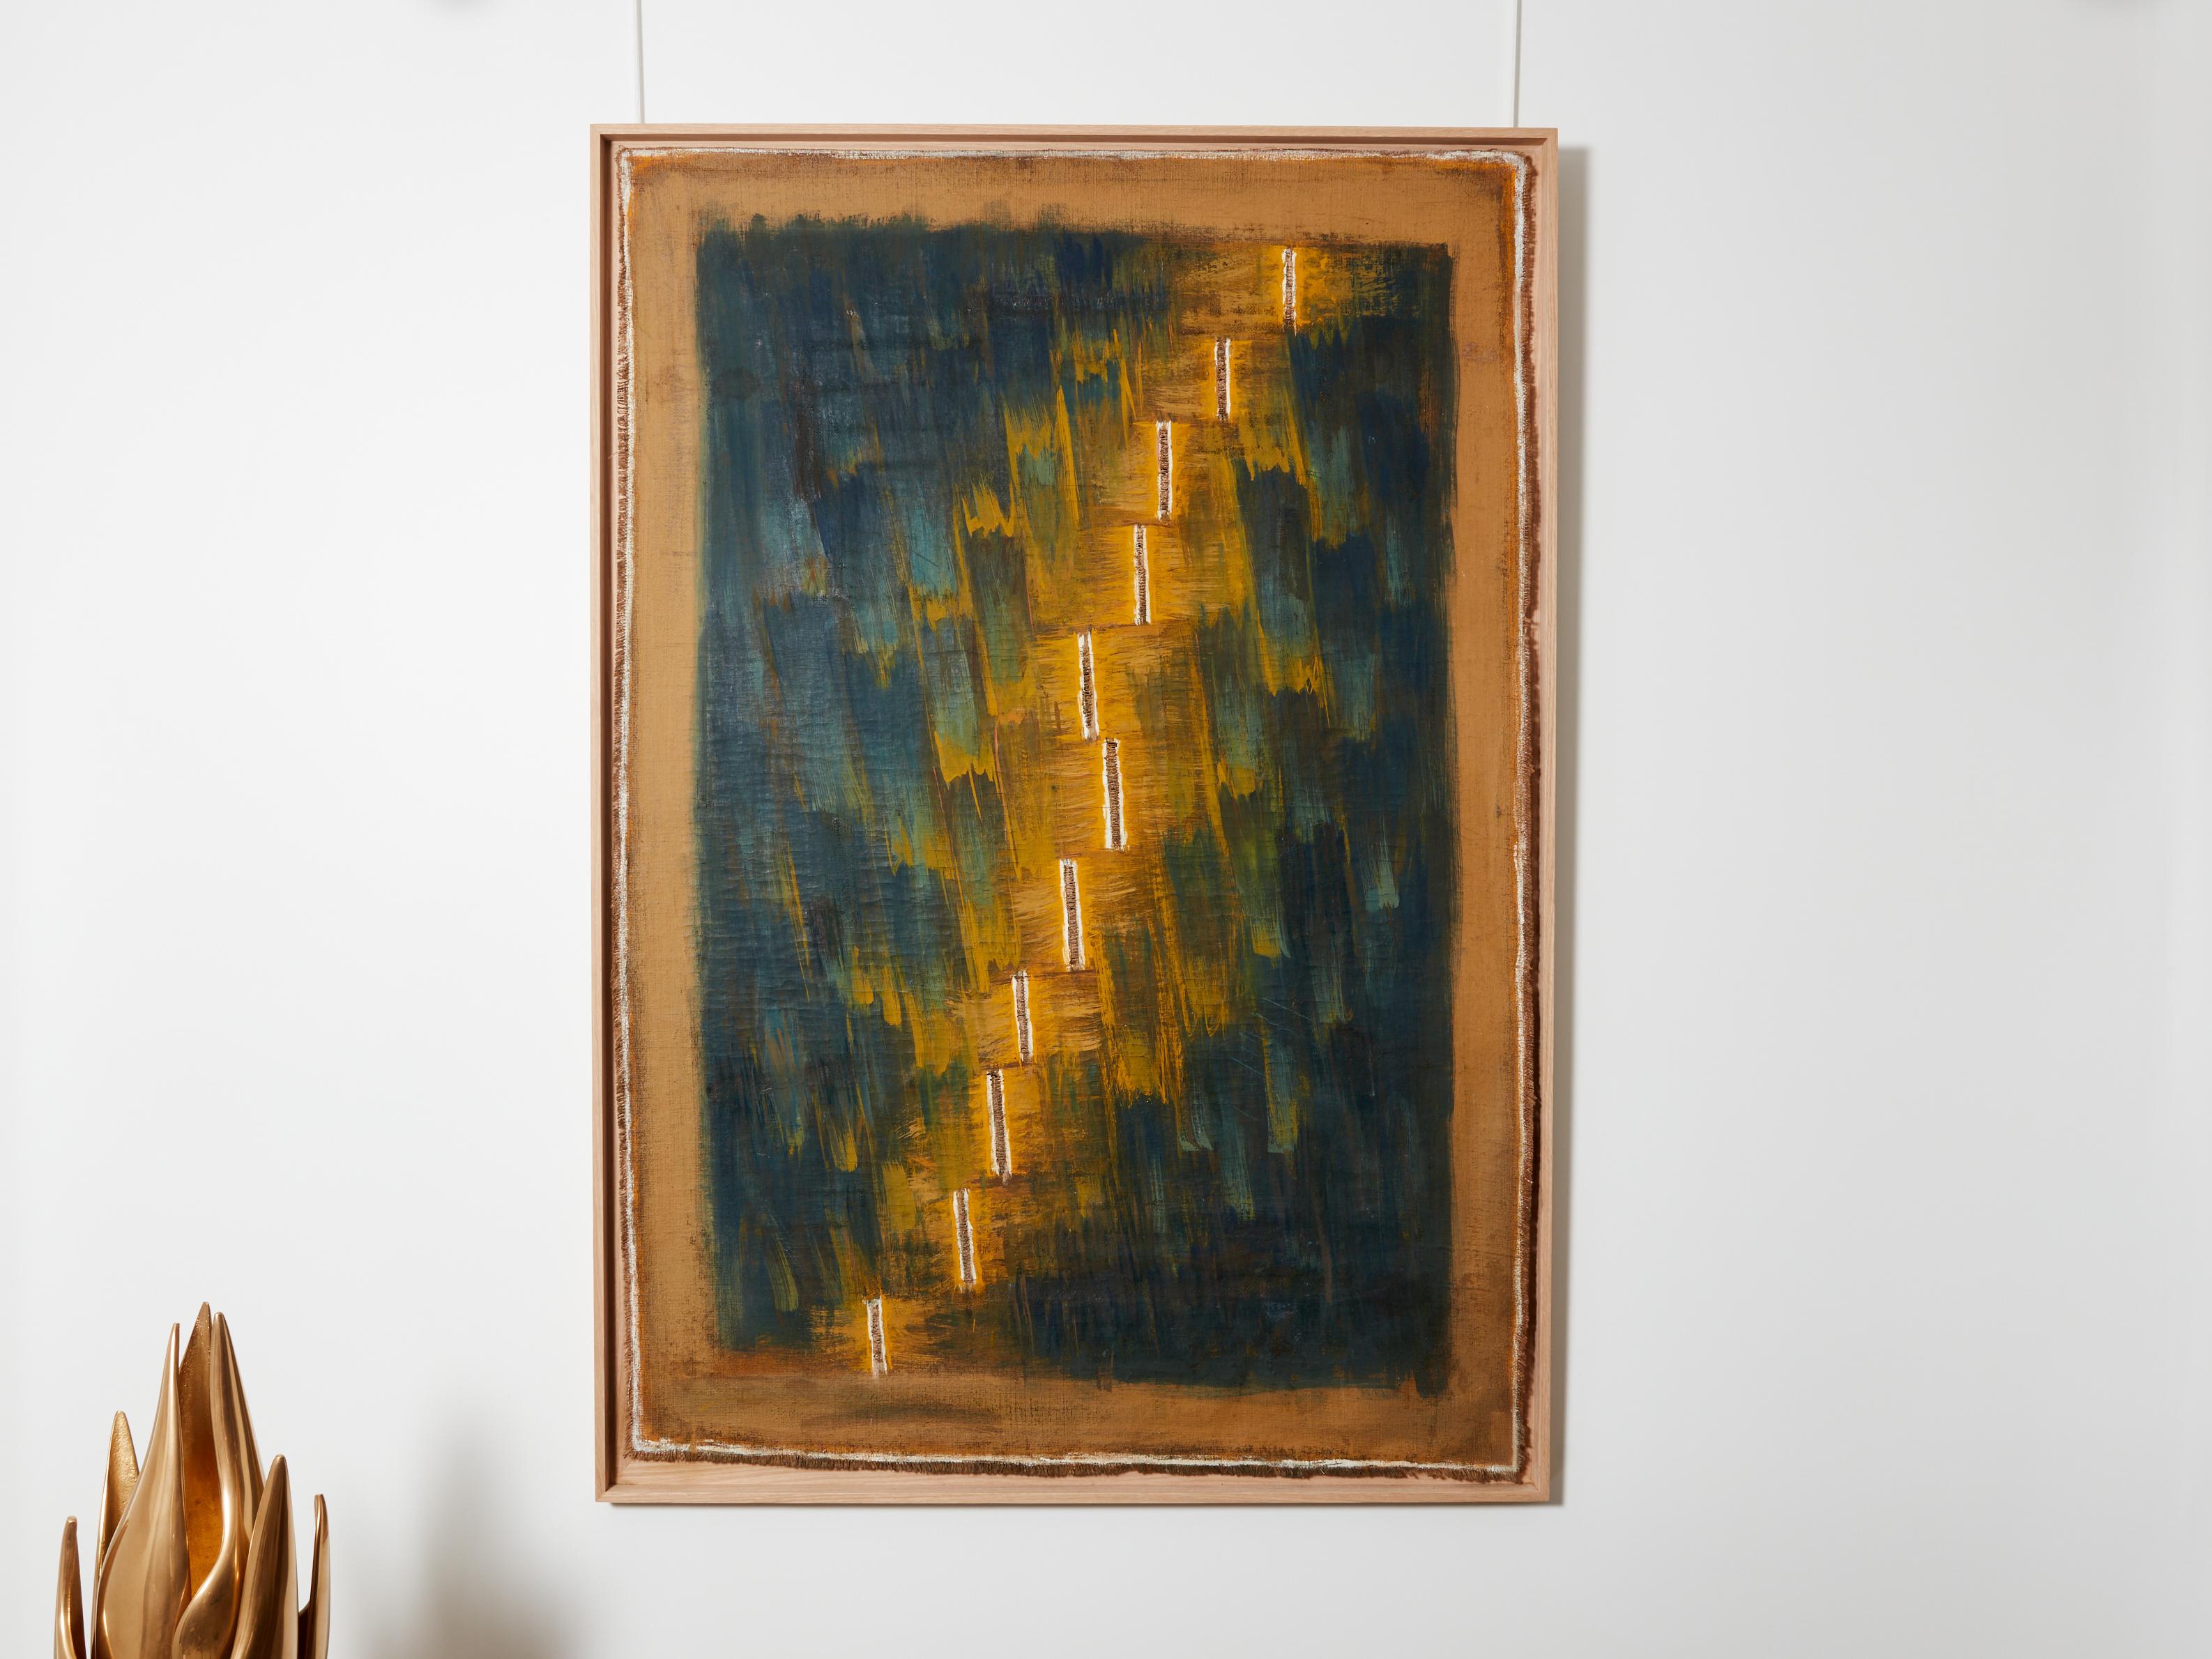 This is a large and powerful oil on toile de jute by Greek artist Daniel Panagopoulos, dit Danil, dated 1989 on the back. It’s been framed with an oak wood shadow box matching the jute color. The size includes the frame, the jute being 52 inches x